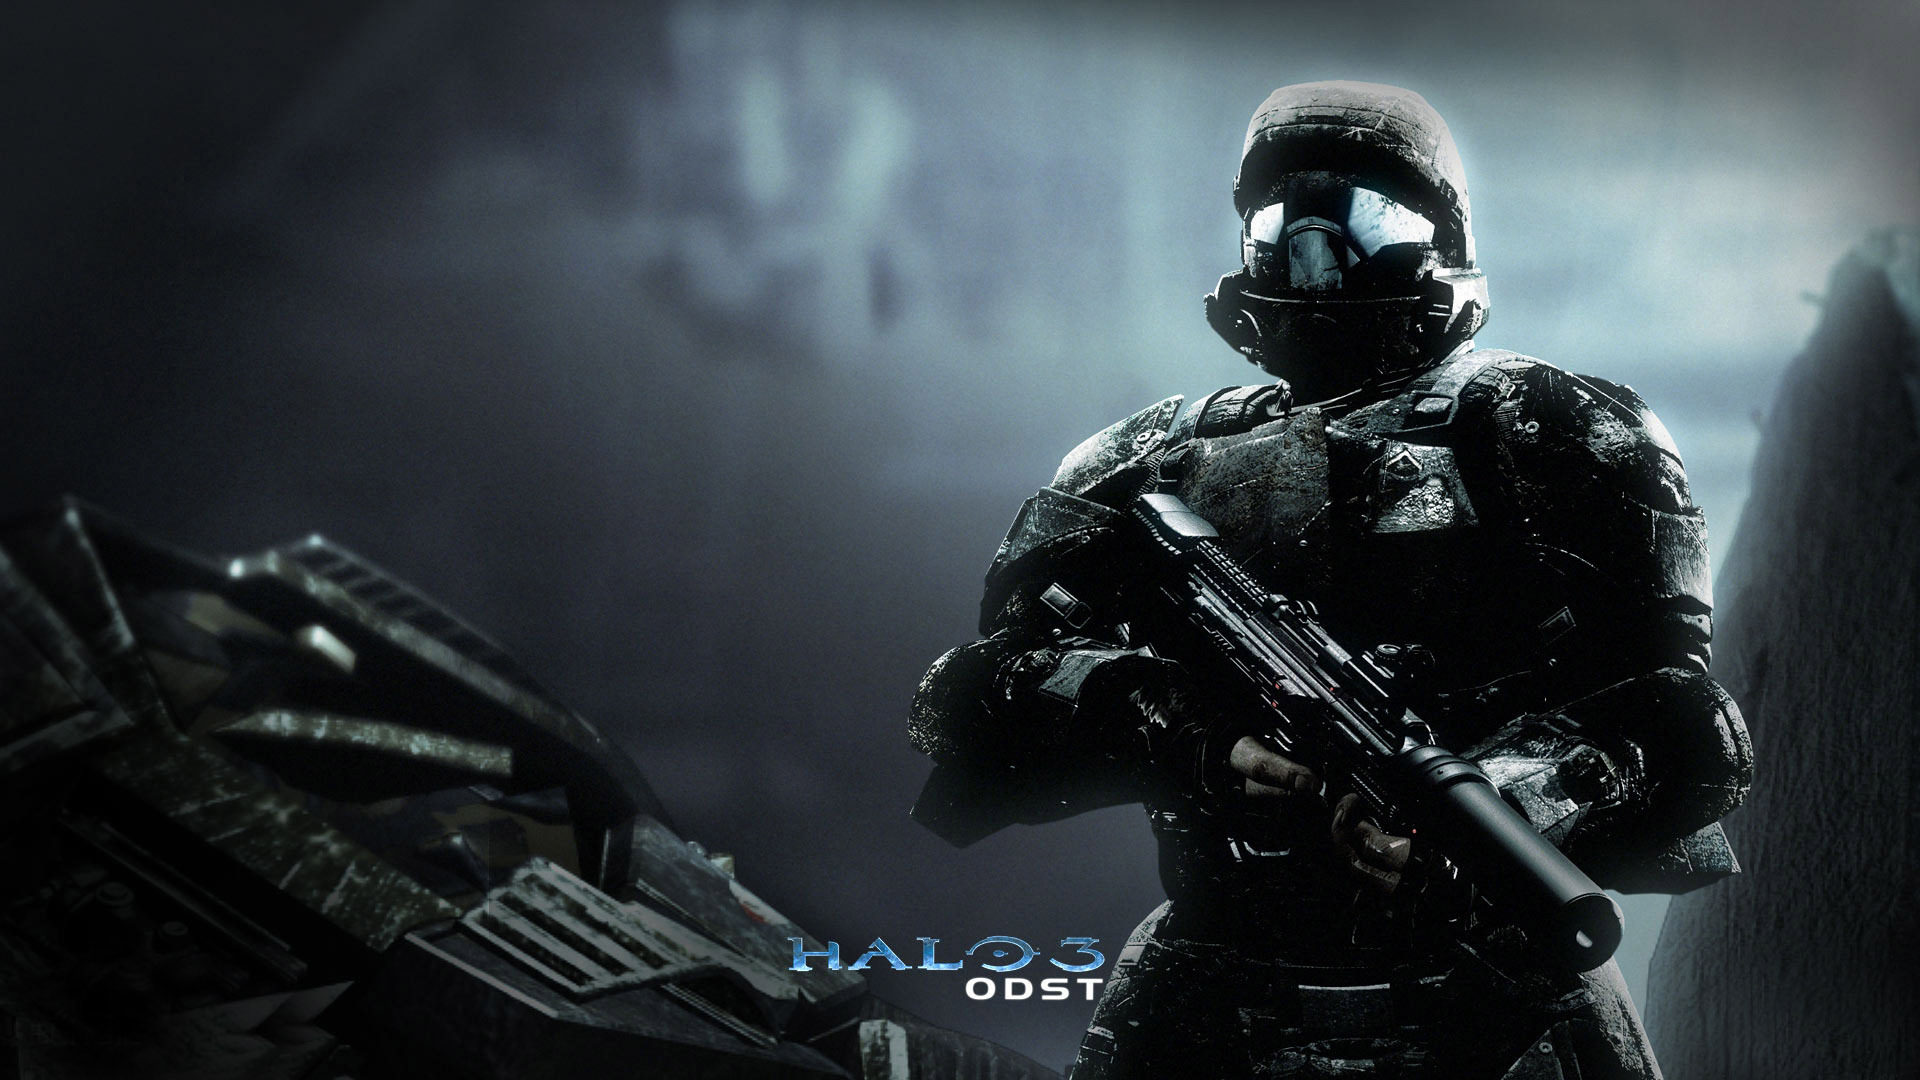 Video Game Halo 3 ODST 1920x1080